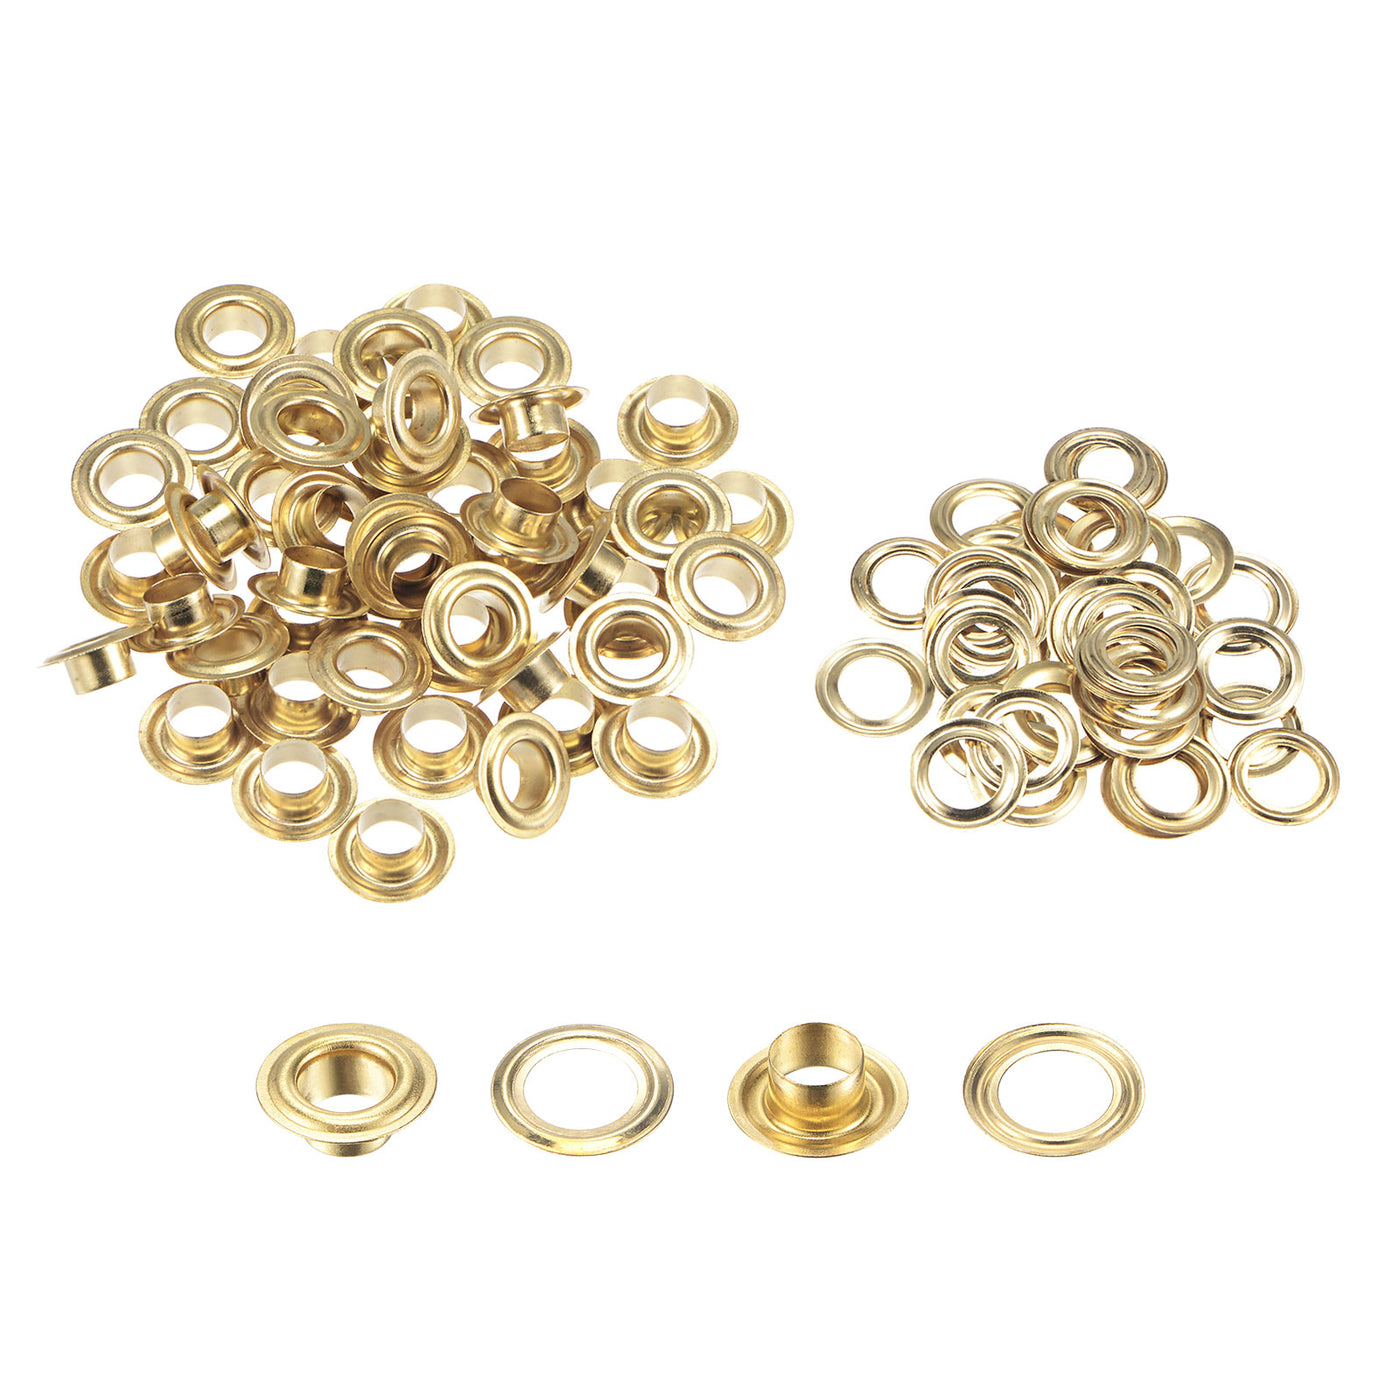 uxcell Uxcell 50Set 7.5mm Hole Copper Grommets Eyelets Gold Tone for Fabric Leather